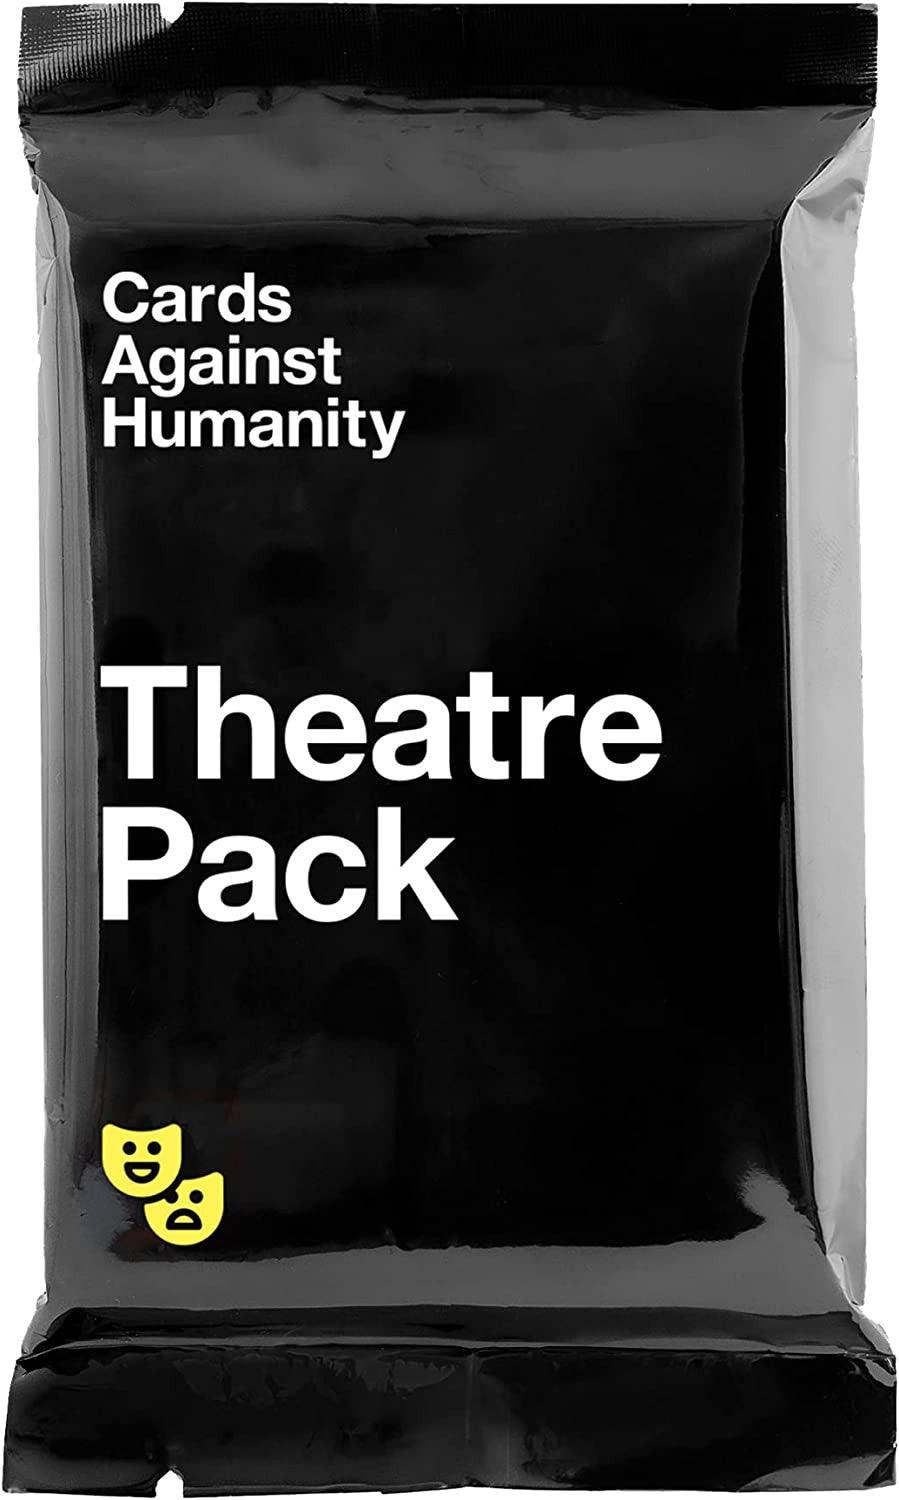 VR-85503 Cards Against Humanity Theatre Pack (Do not sell on online marketplaces) - Cards Against Humanity - Titan Pop Culture